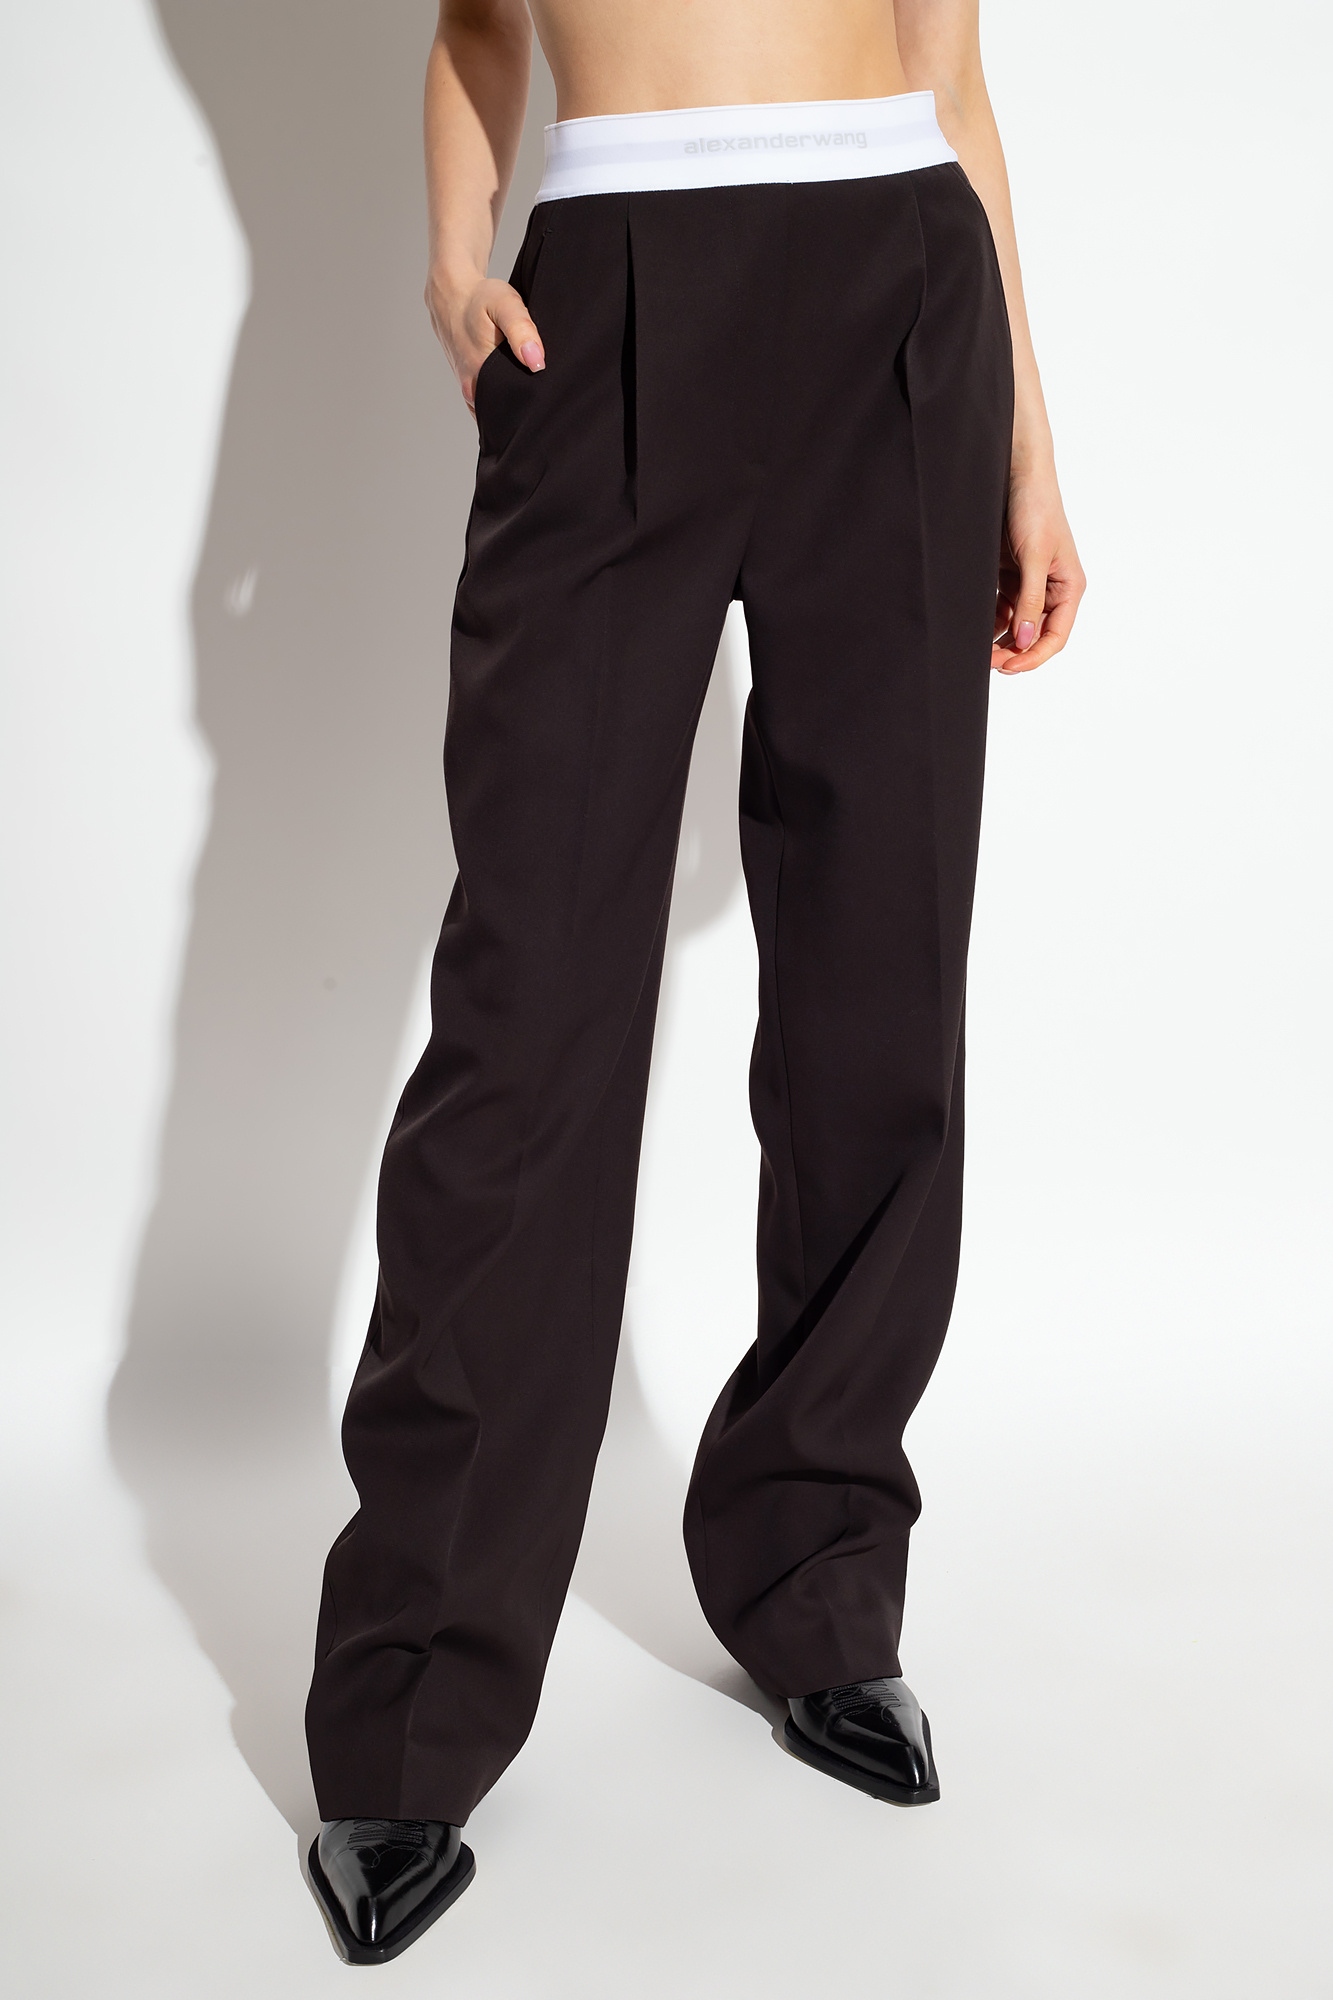 Alexander Wang Pleat-front trousers